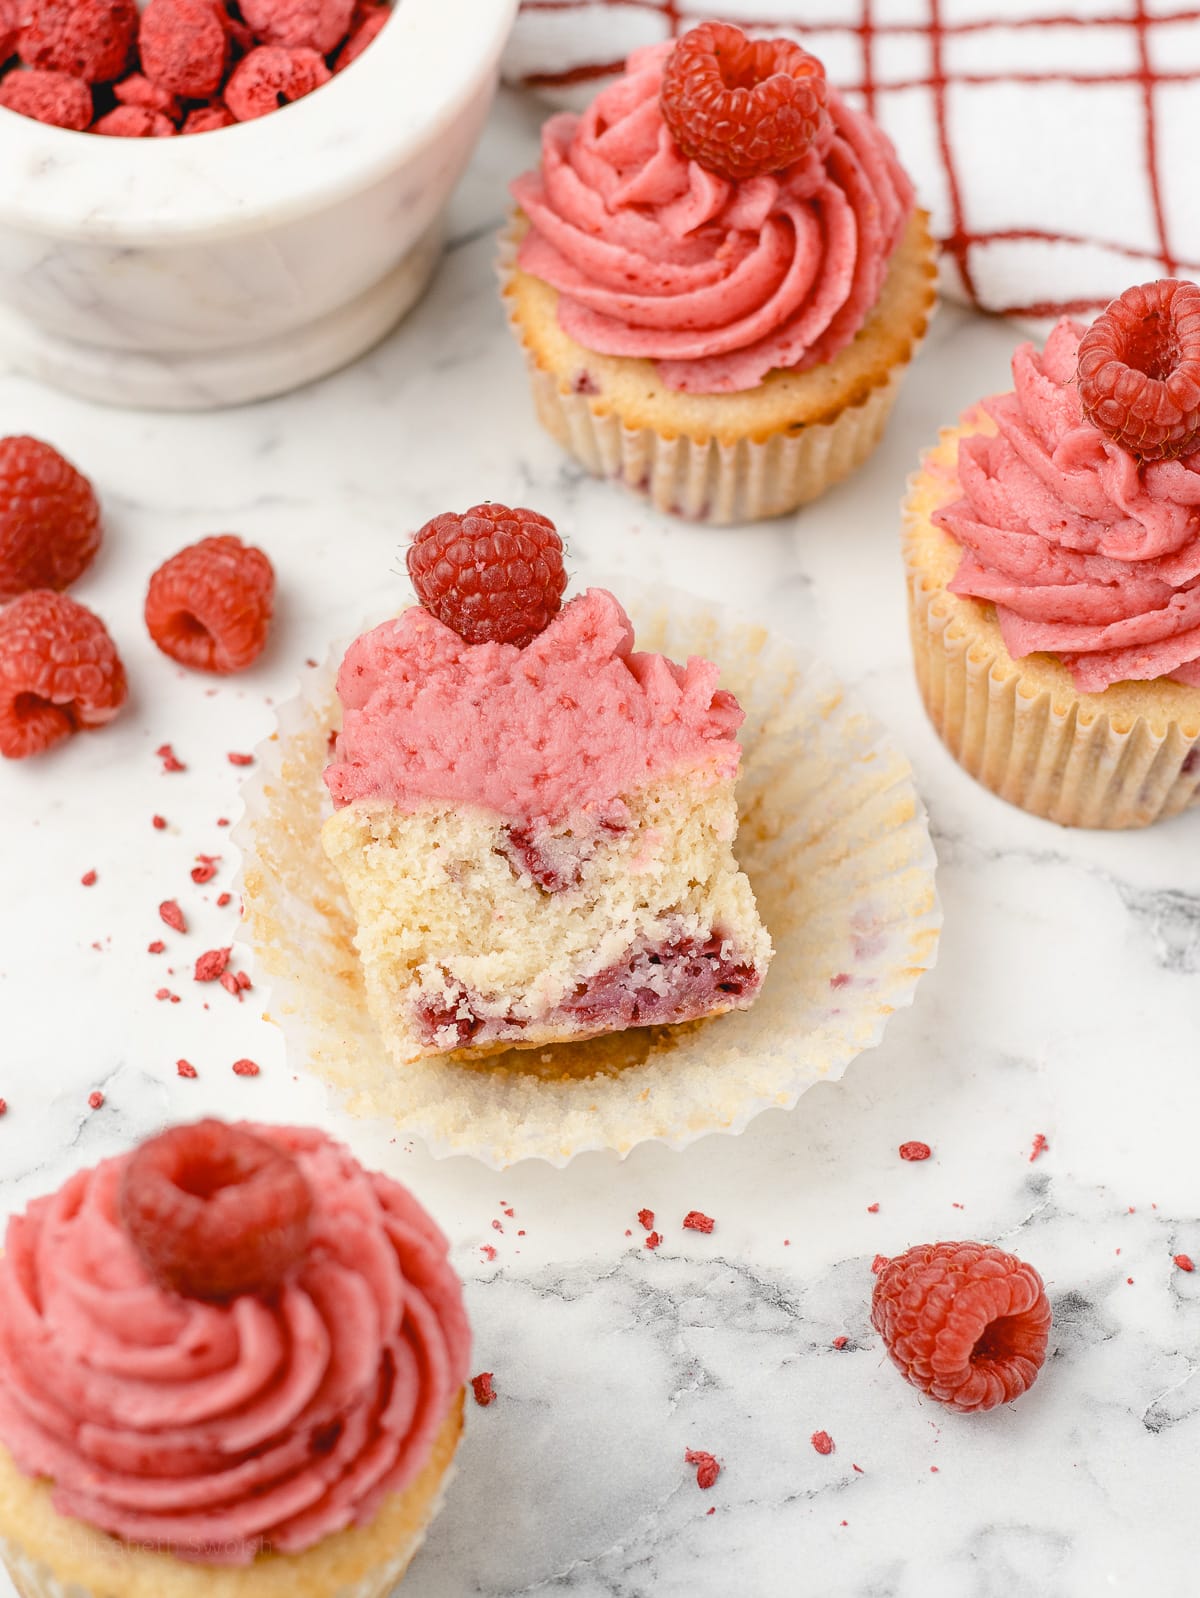 Unwrapped and sliced in half Raspberry Cupcake with more cupcakes surrounding it.